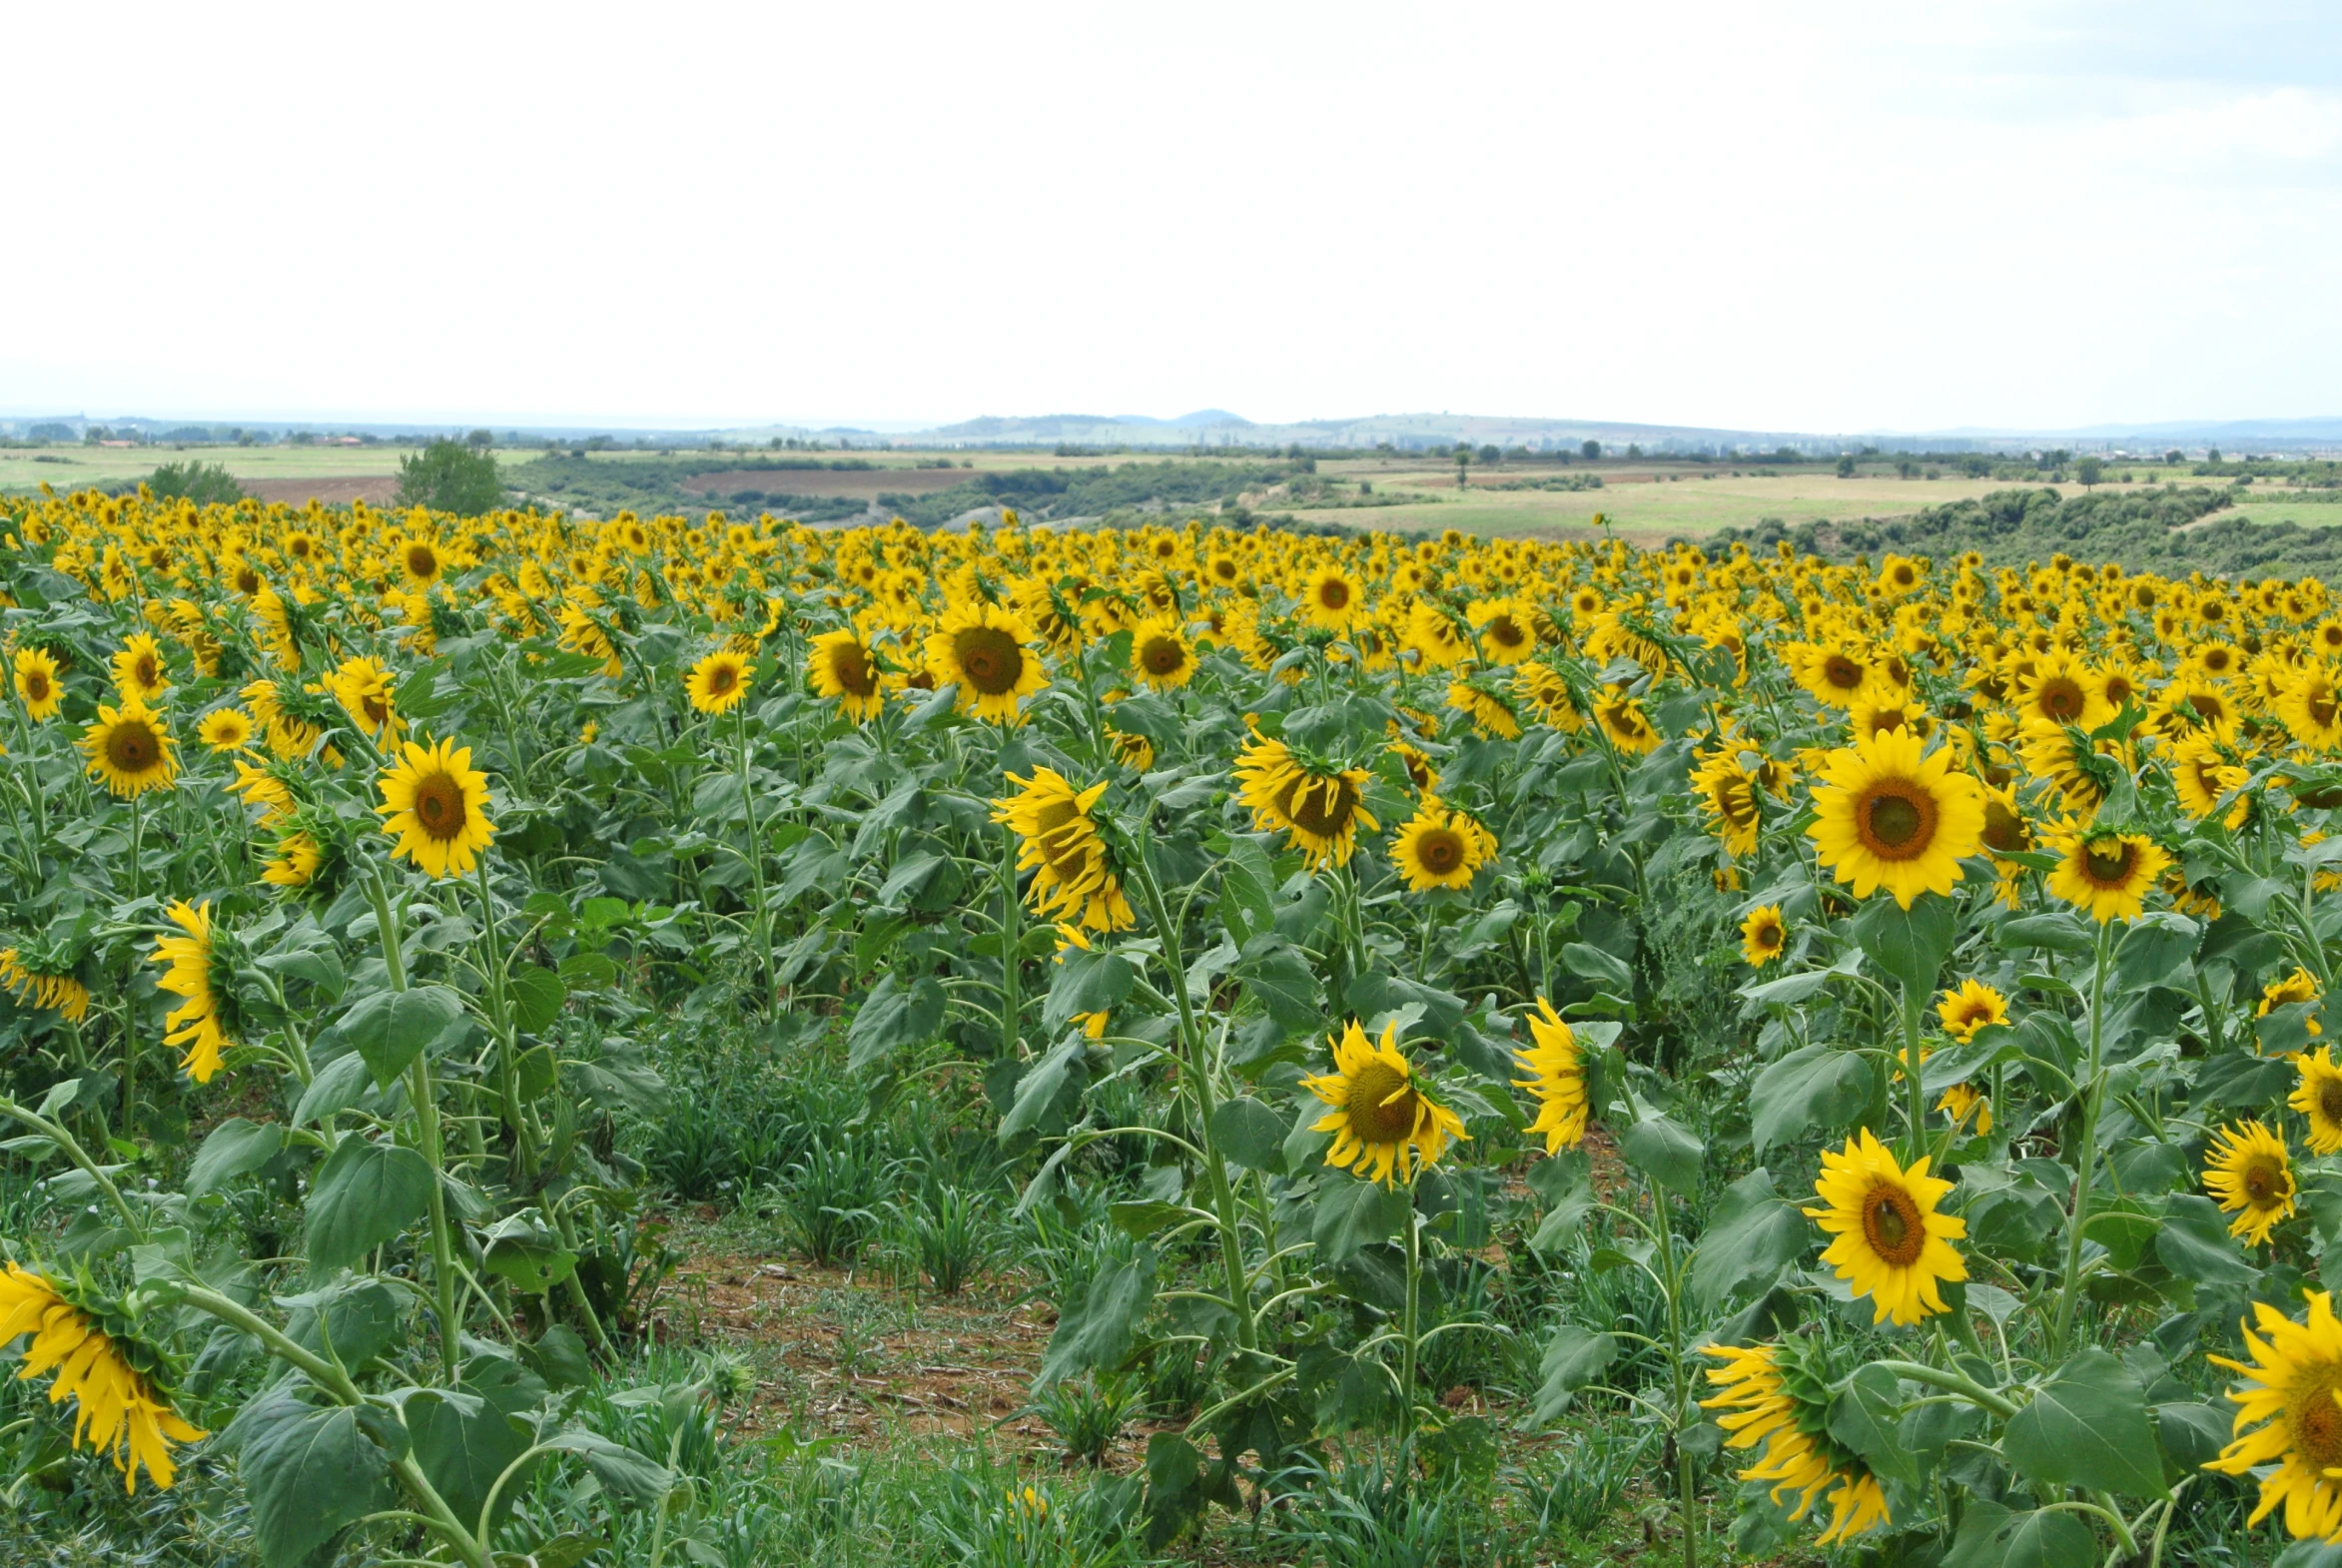 an image of the field of sunflowers at a country farm